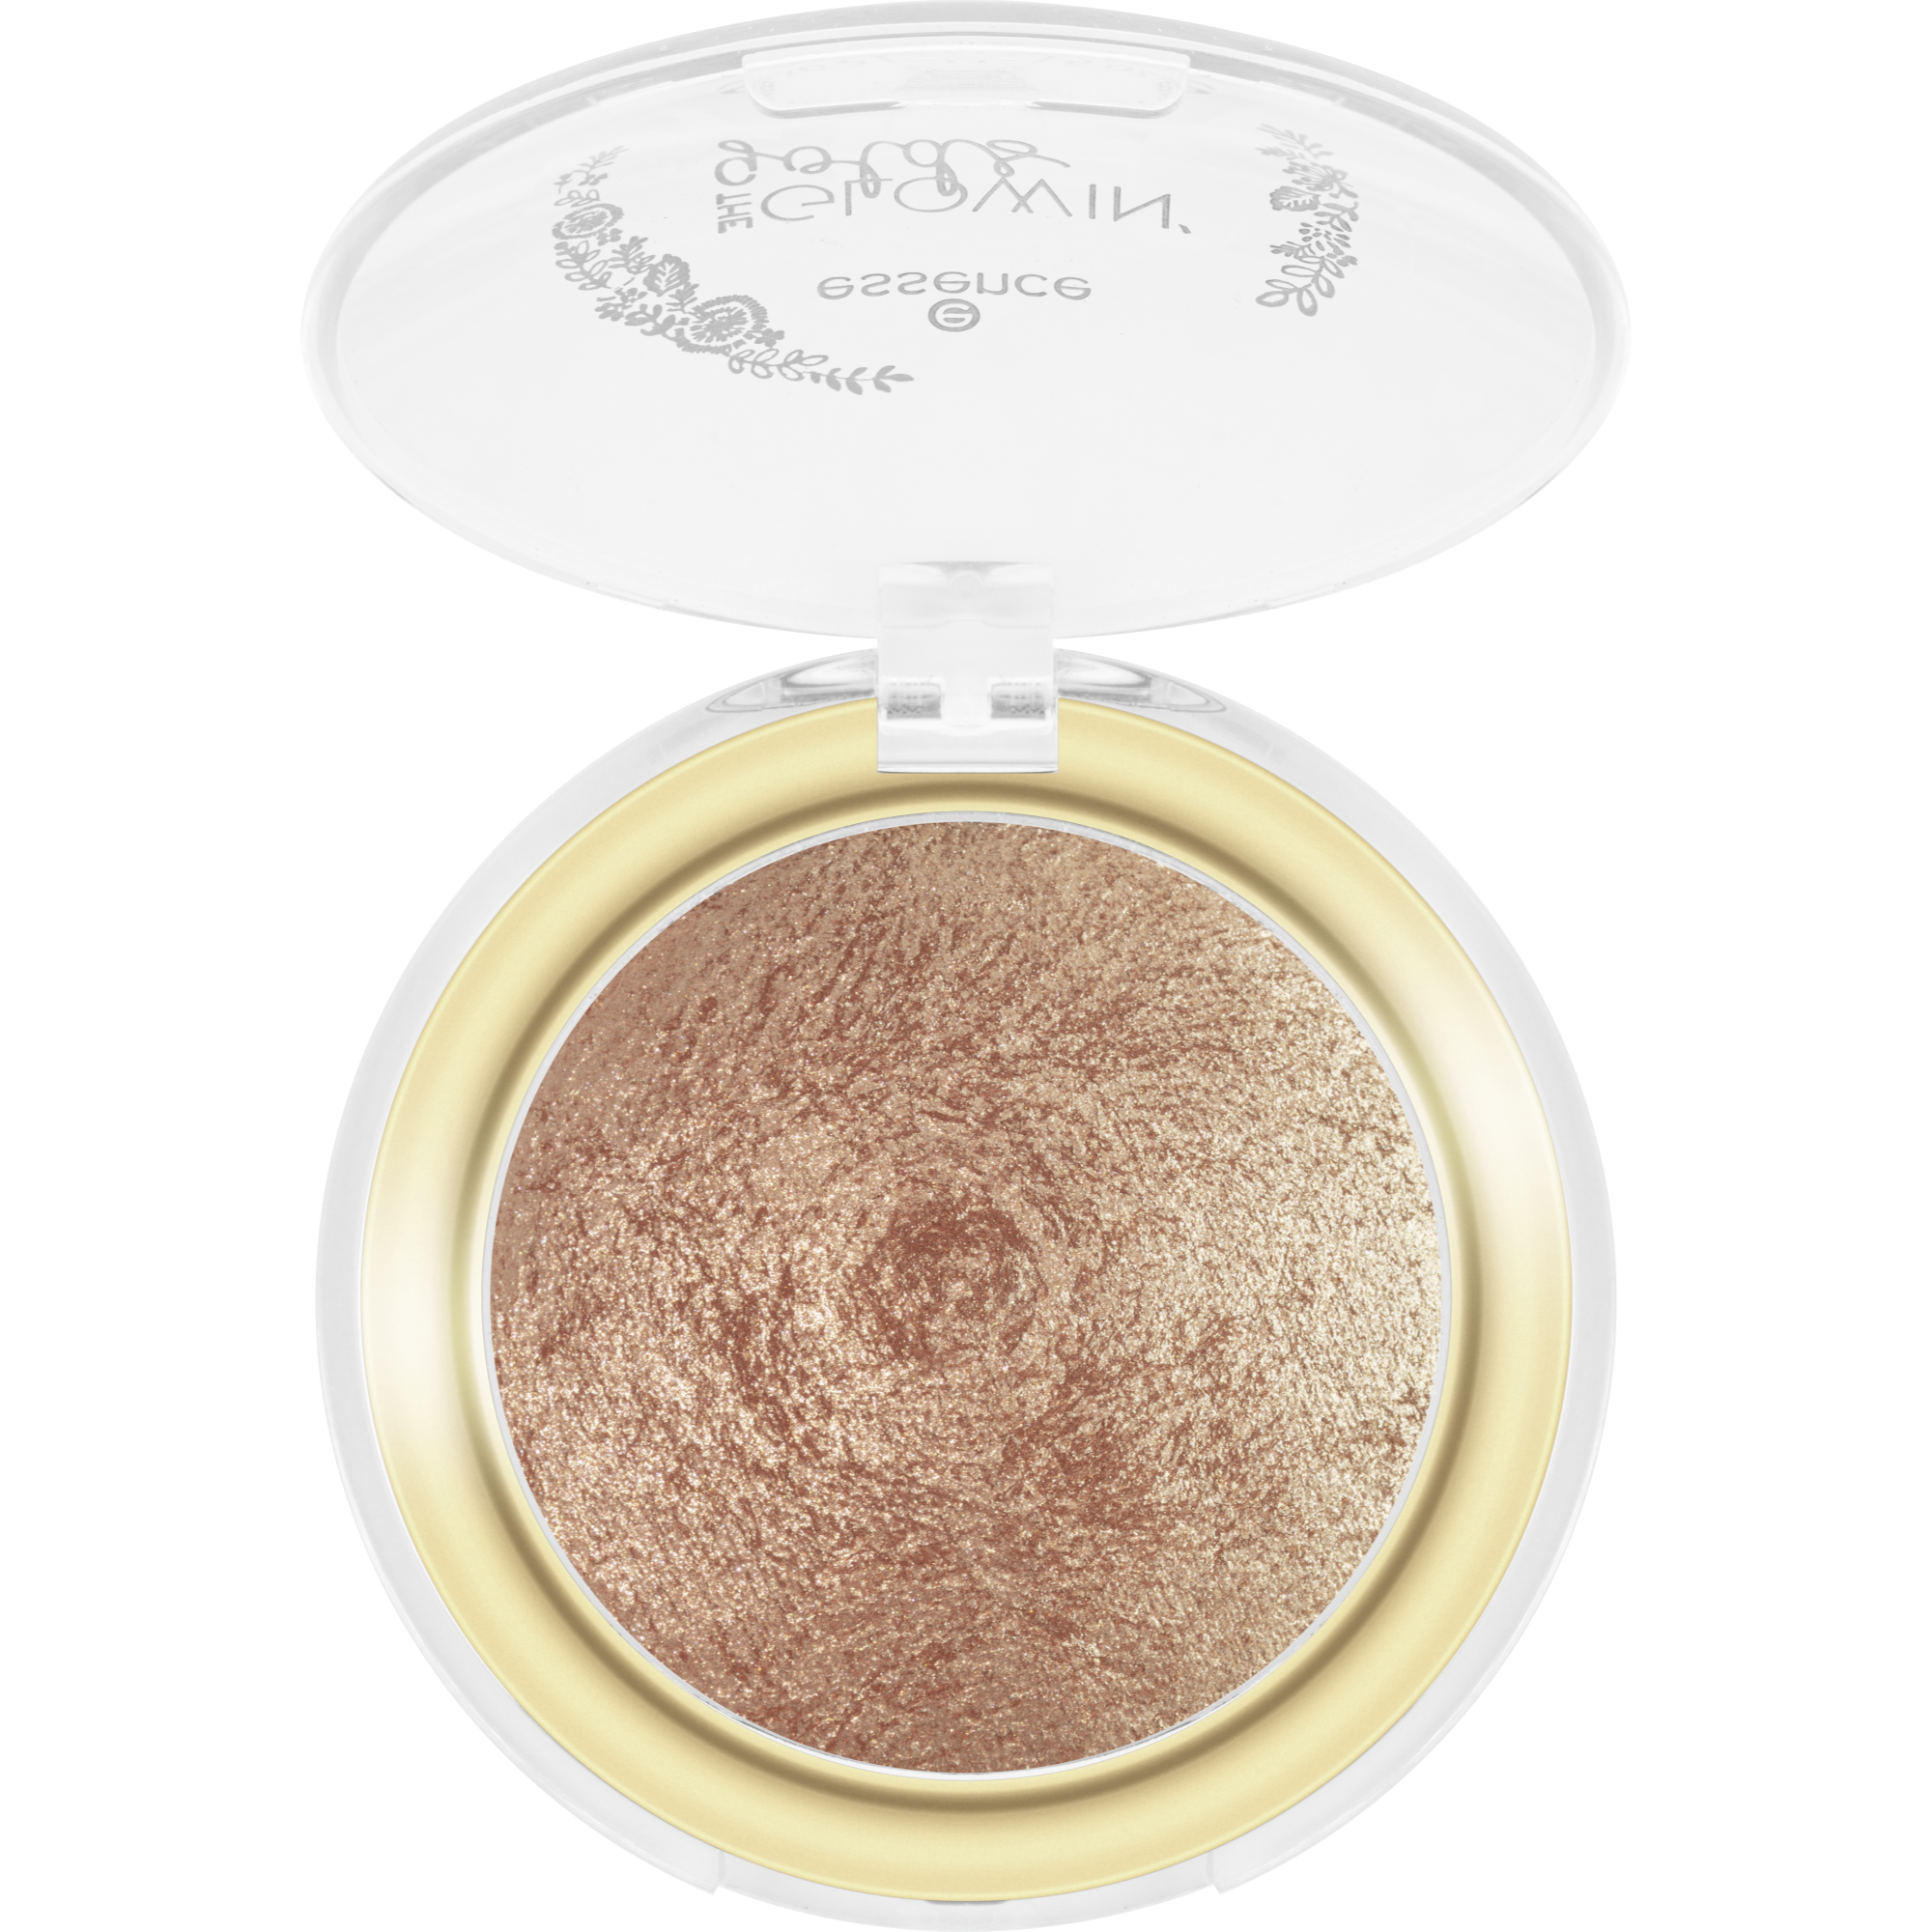 the glowin' golds vitamin C baked highlighter